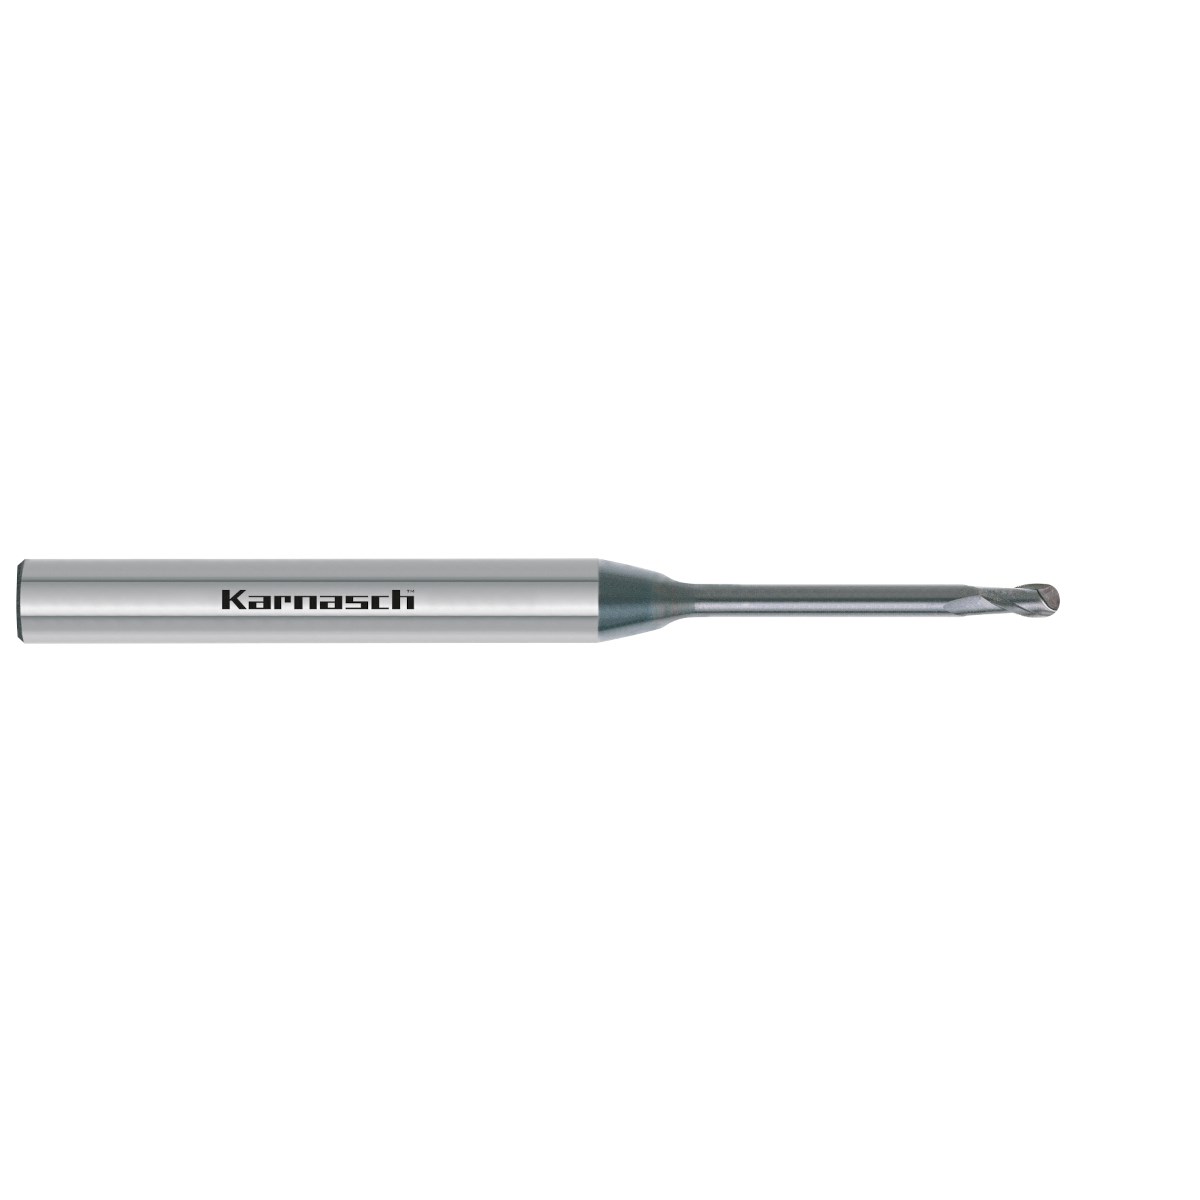 38 mm Length 30 Degree Angle 3.30 mm Cutting Length KYOCERA 1625-0433.130 Series 1625 Standard Length Ball Nose End Mill 1.10 mm Cutting Diameter 3 mm Shank Diameter 2 Flute Uncoated Carbide